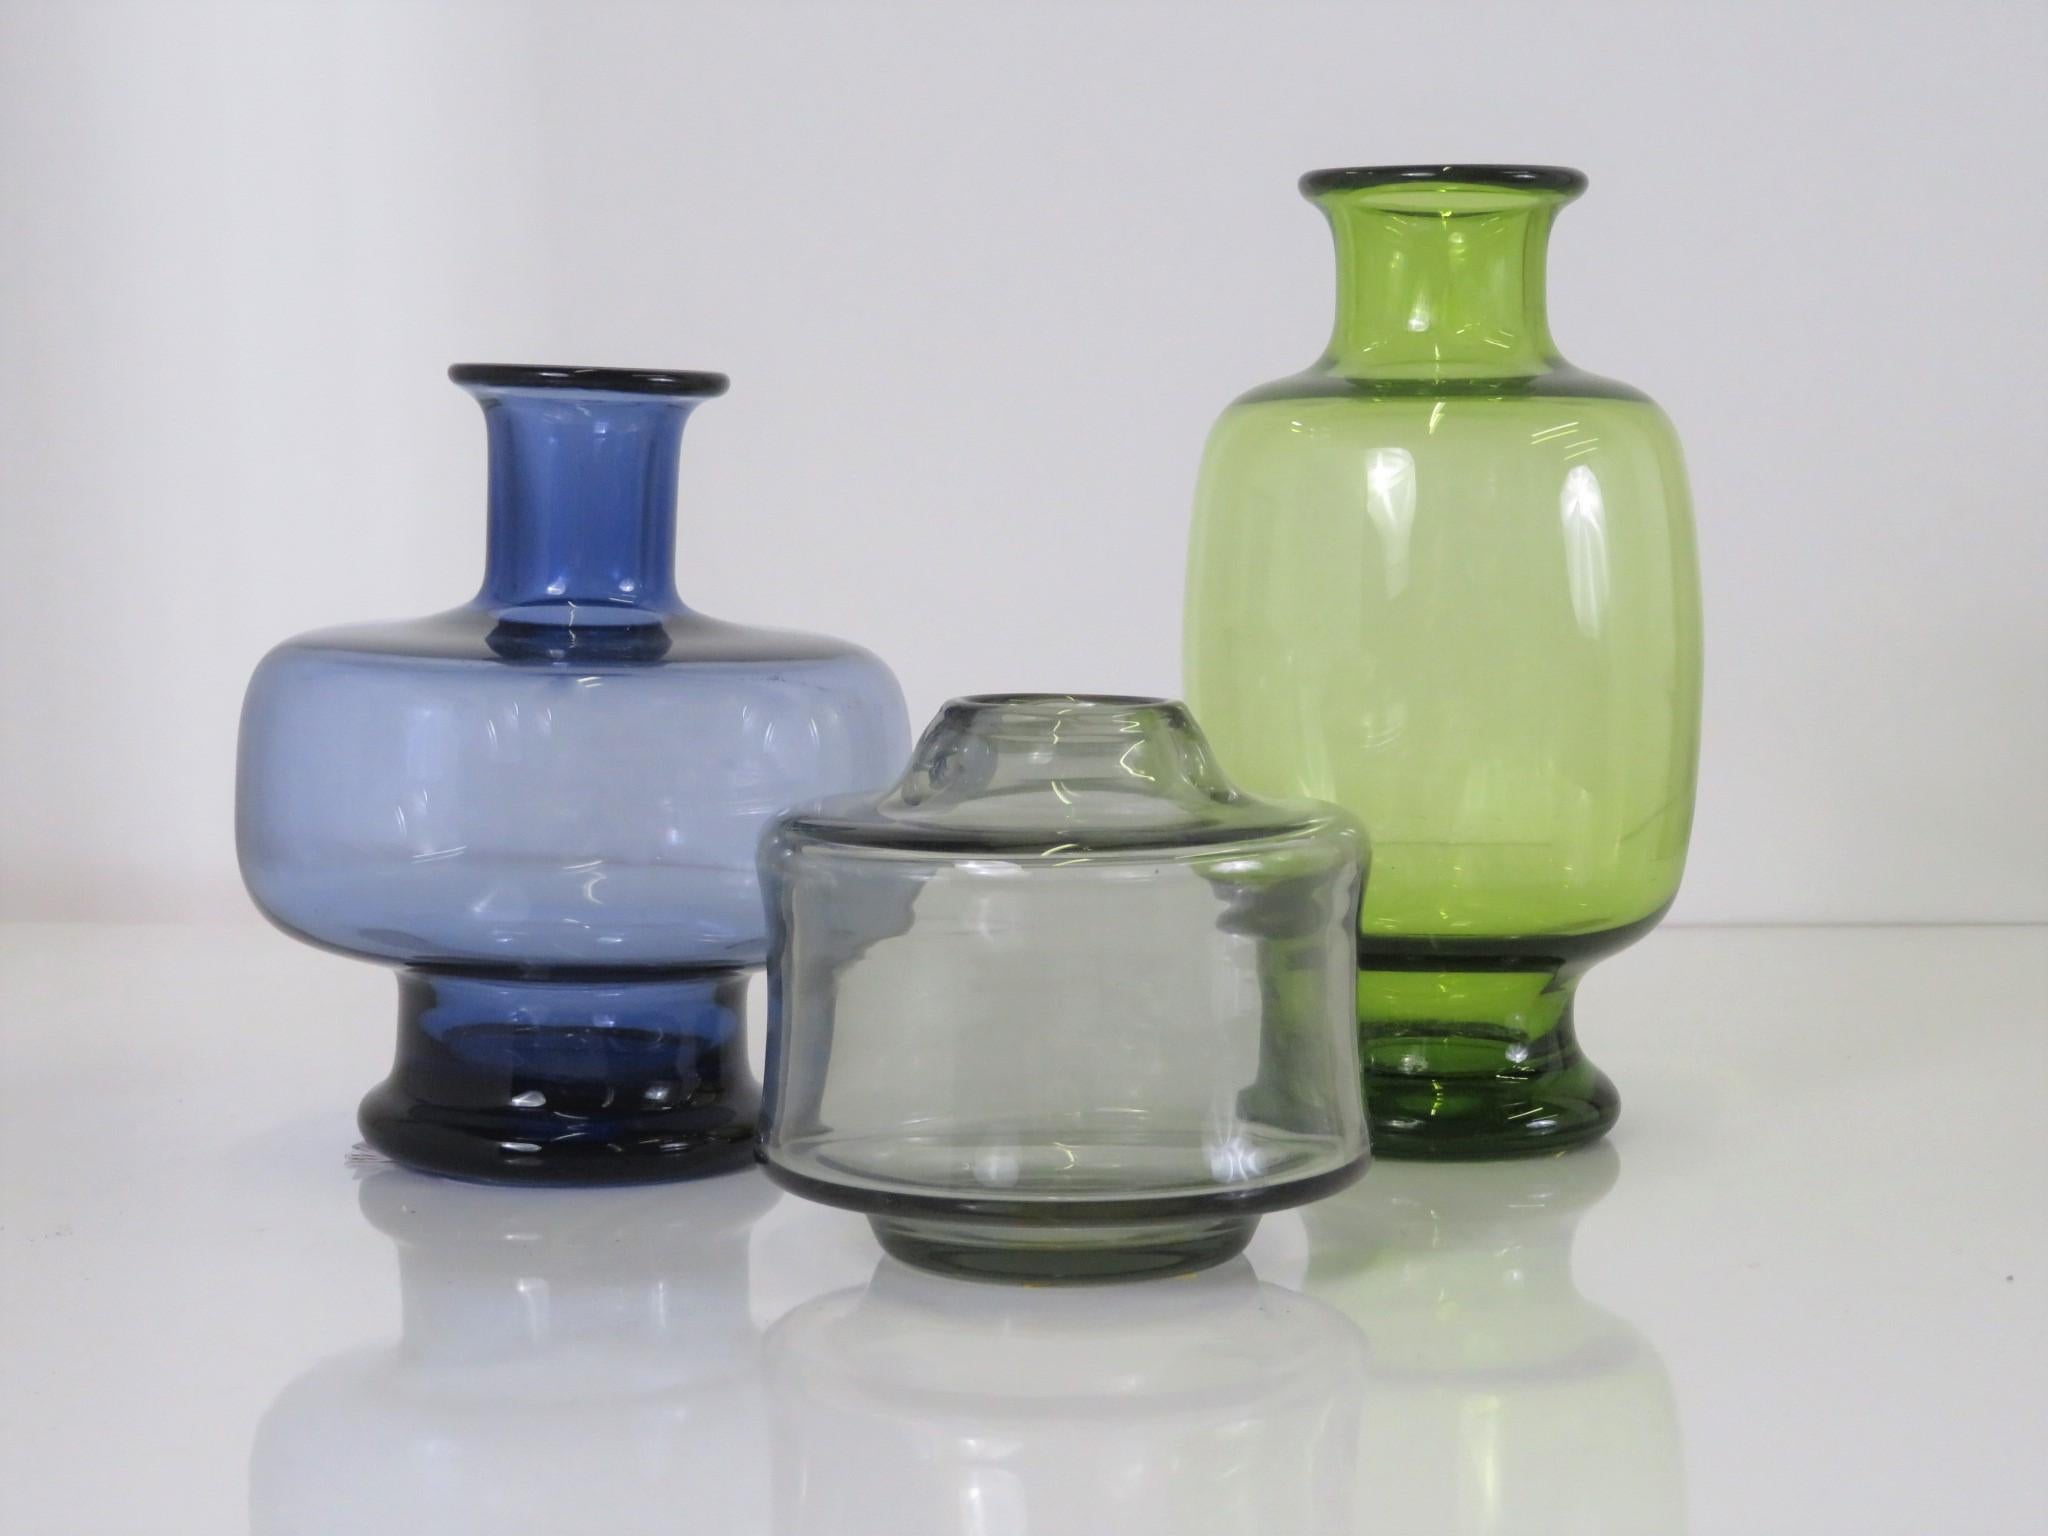 Lutken grouping of 3 blown glass vessels for the Danish firm Holmegaard from the late 1950s. The larger vase in Majgrön (May Green), the middle size in Safir (Safire) and the squat one in Gray. They all are engraved on the bottom with Per Lutken’s